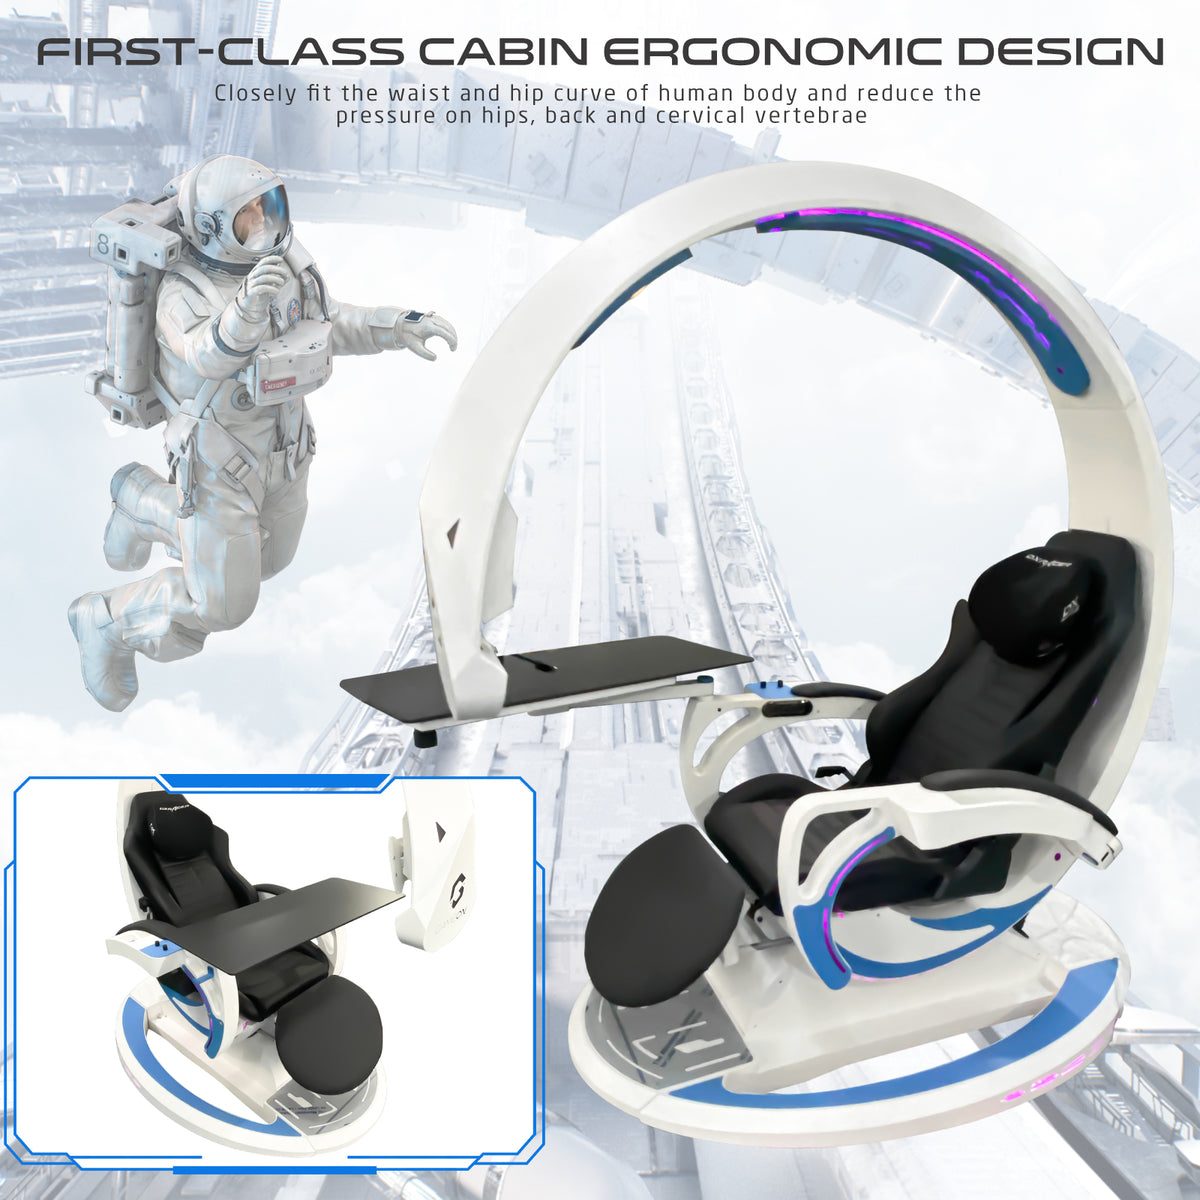 GAMEON Orion X Computer Gaming Reclining Simulator Cockpit - White